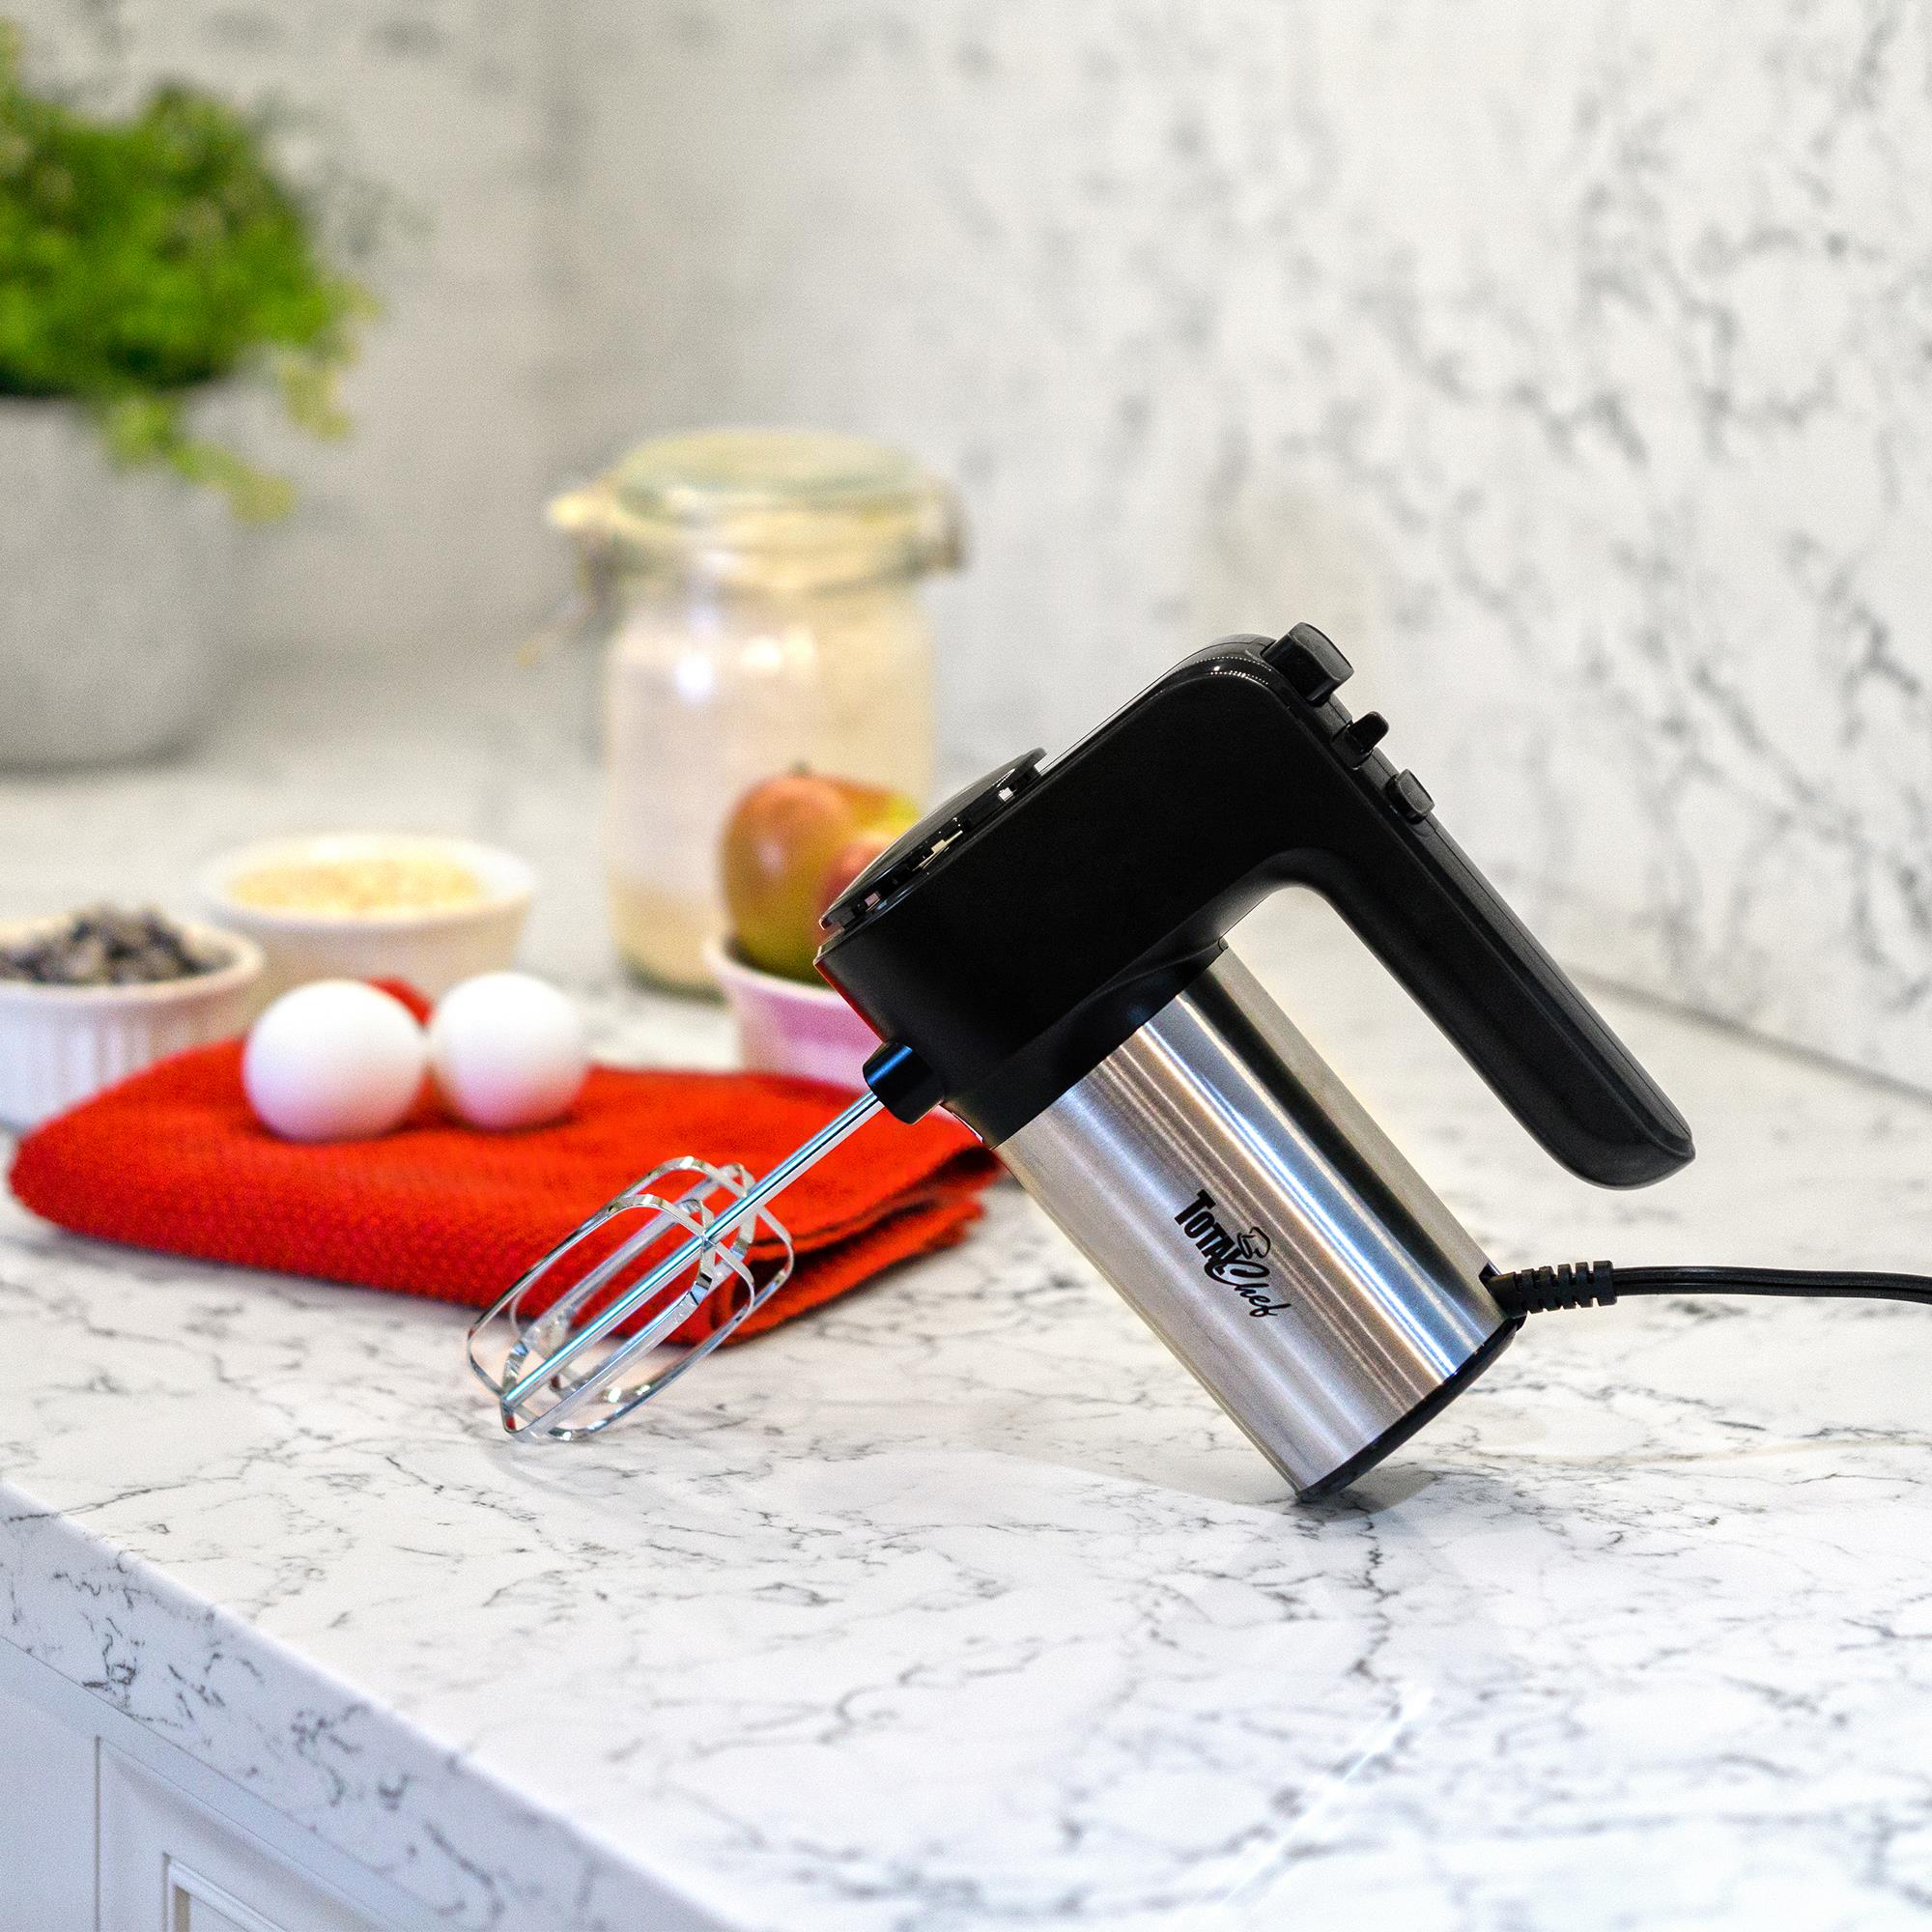 VEVOR Electric Hand Mixer 5-Speed 250 Watt Portable Electric Handheld Mixer with Turbo Boost Beaters Dough Hooks Whisk Storage Case Baking Supplies